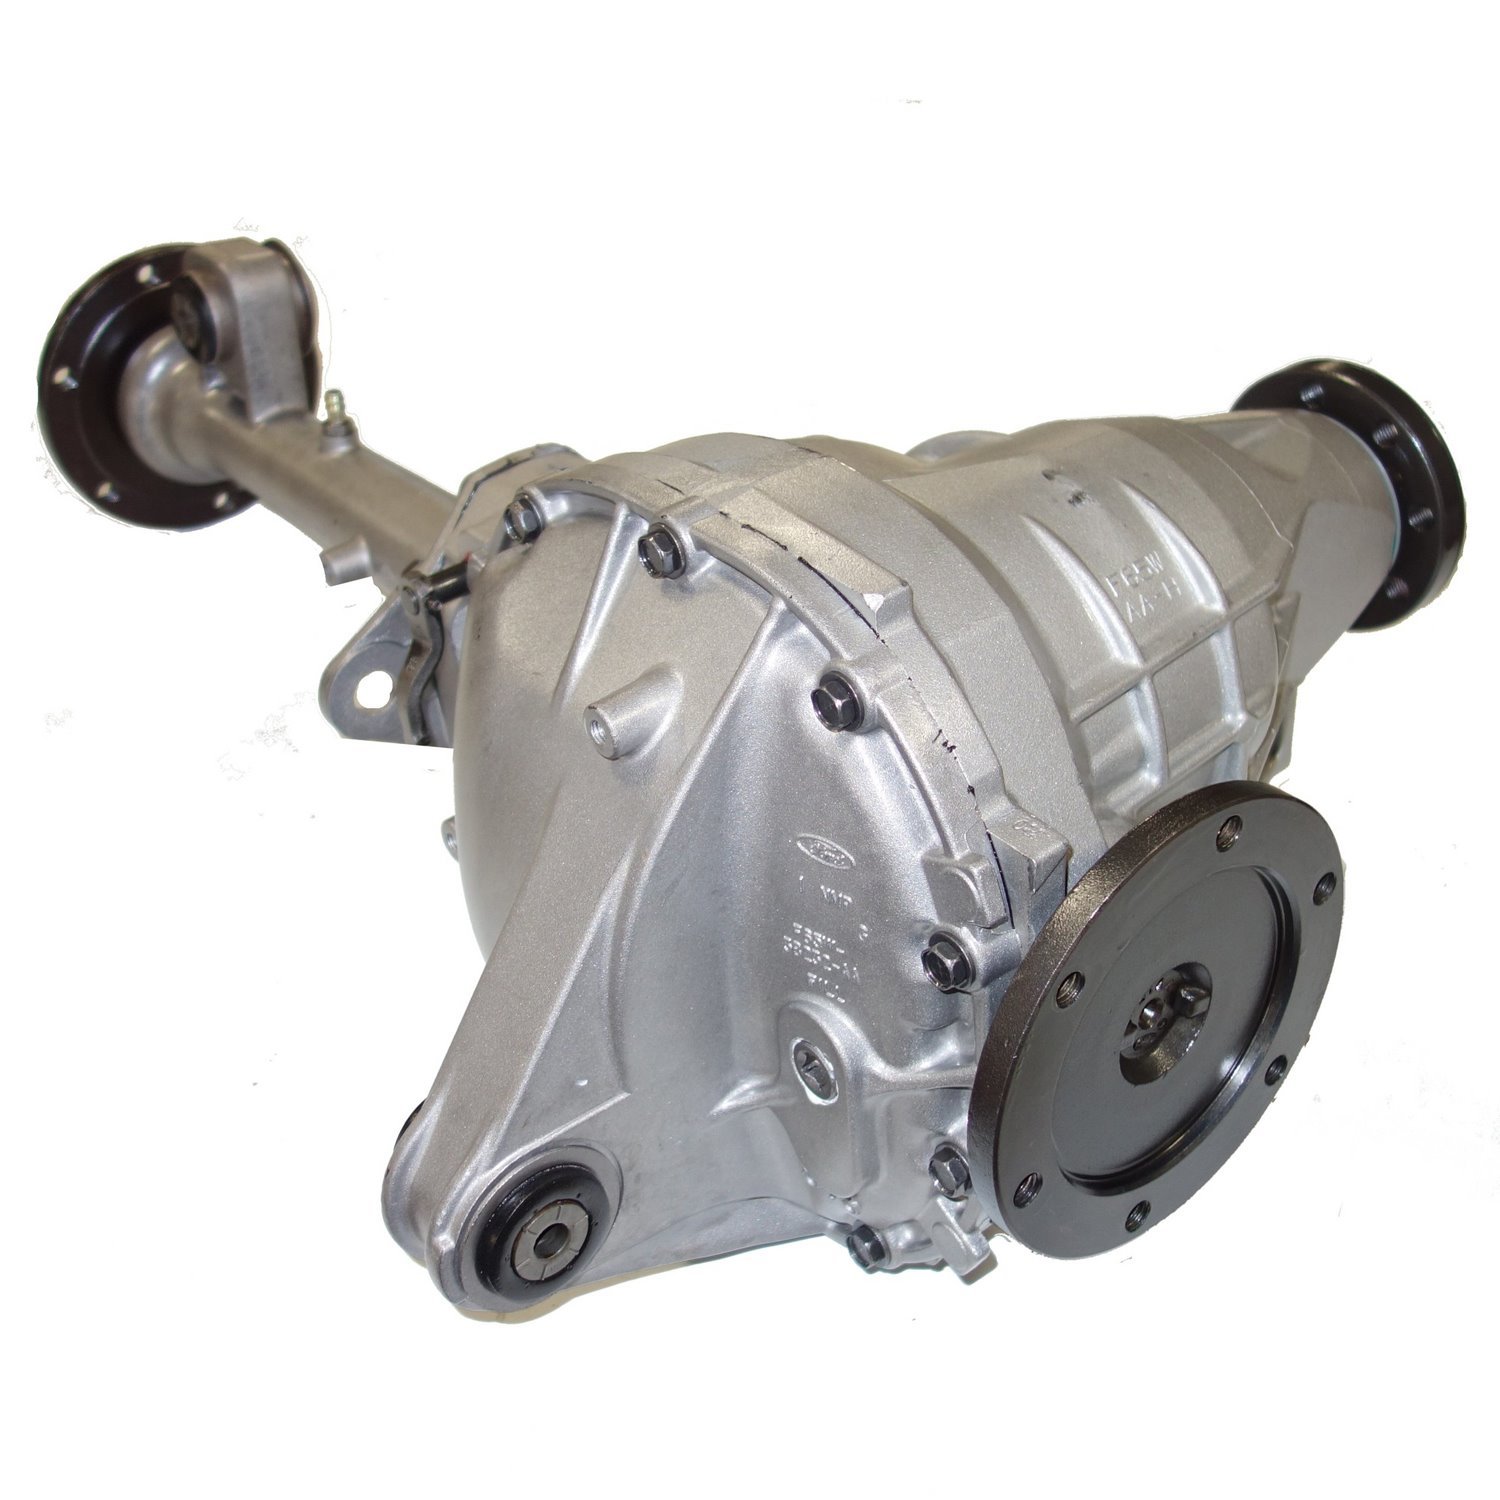 Remanufactured Axle Assembly for 8.8 IFS 97-02 Expedition 3.31 w/o Vacuum Disc